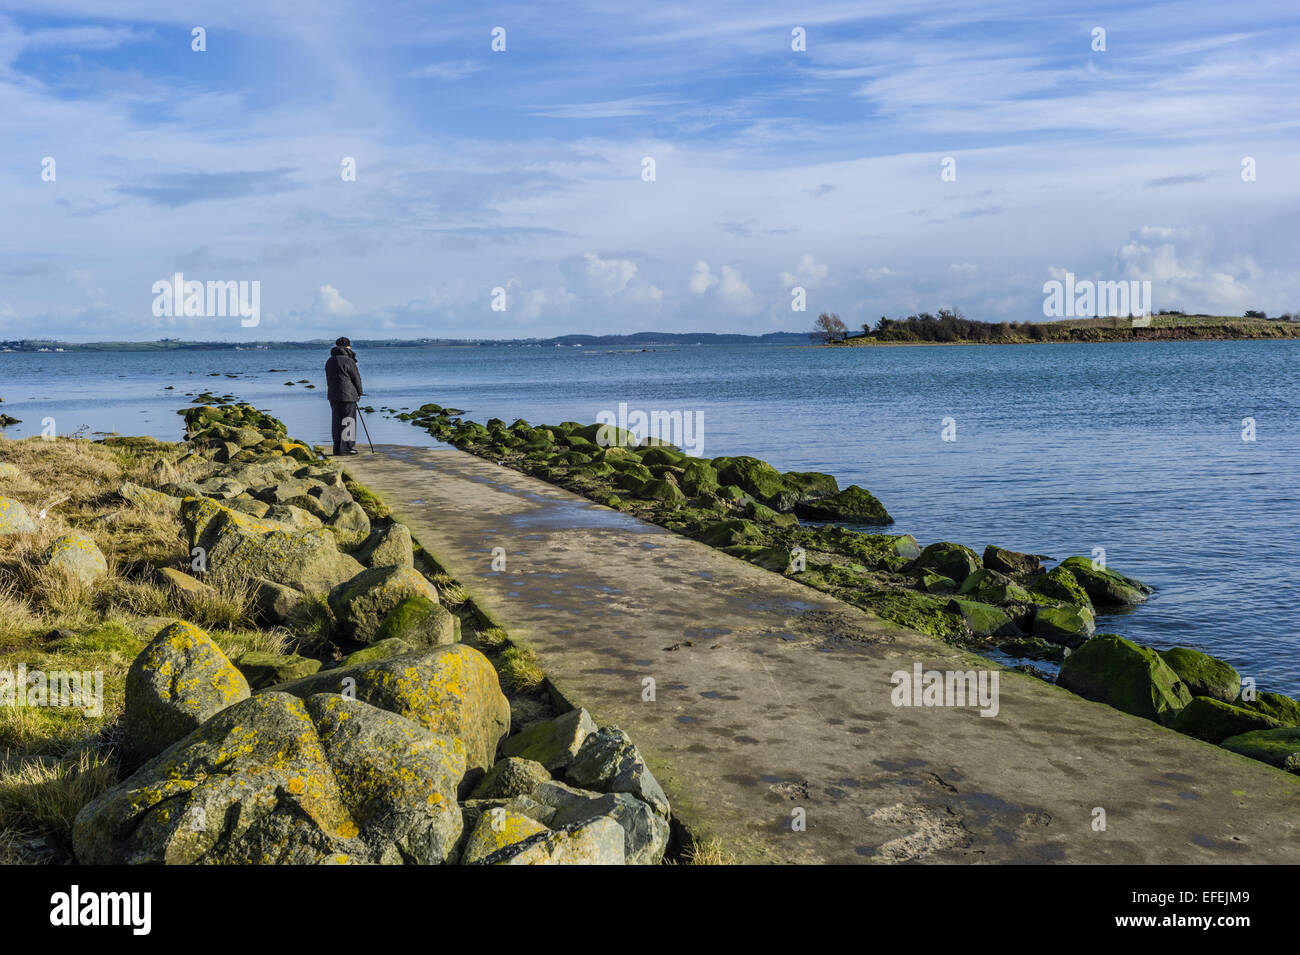 The path to Island Hill is cut off by the rising tide, the path is slowly submerged, one sole person stands to observe. Stock Photo